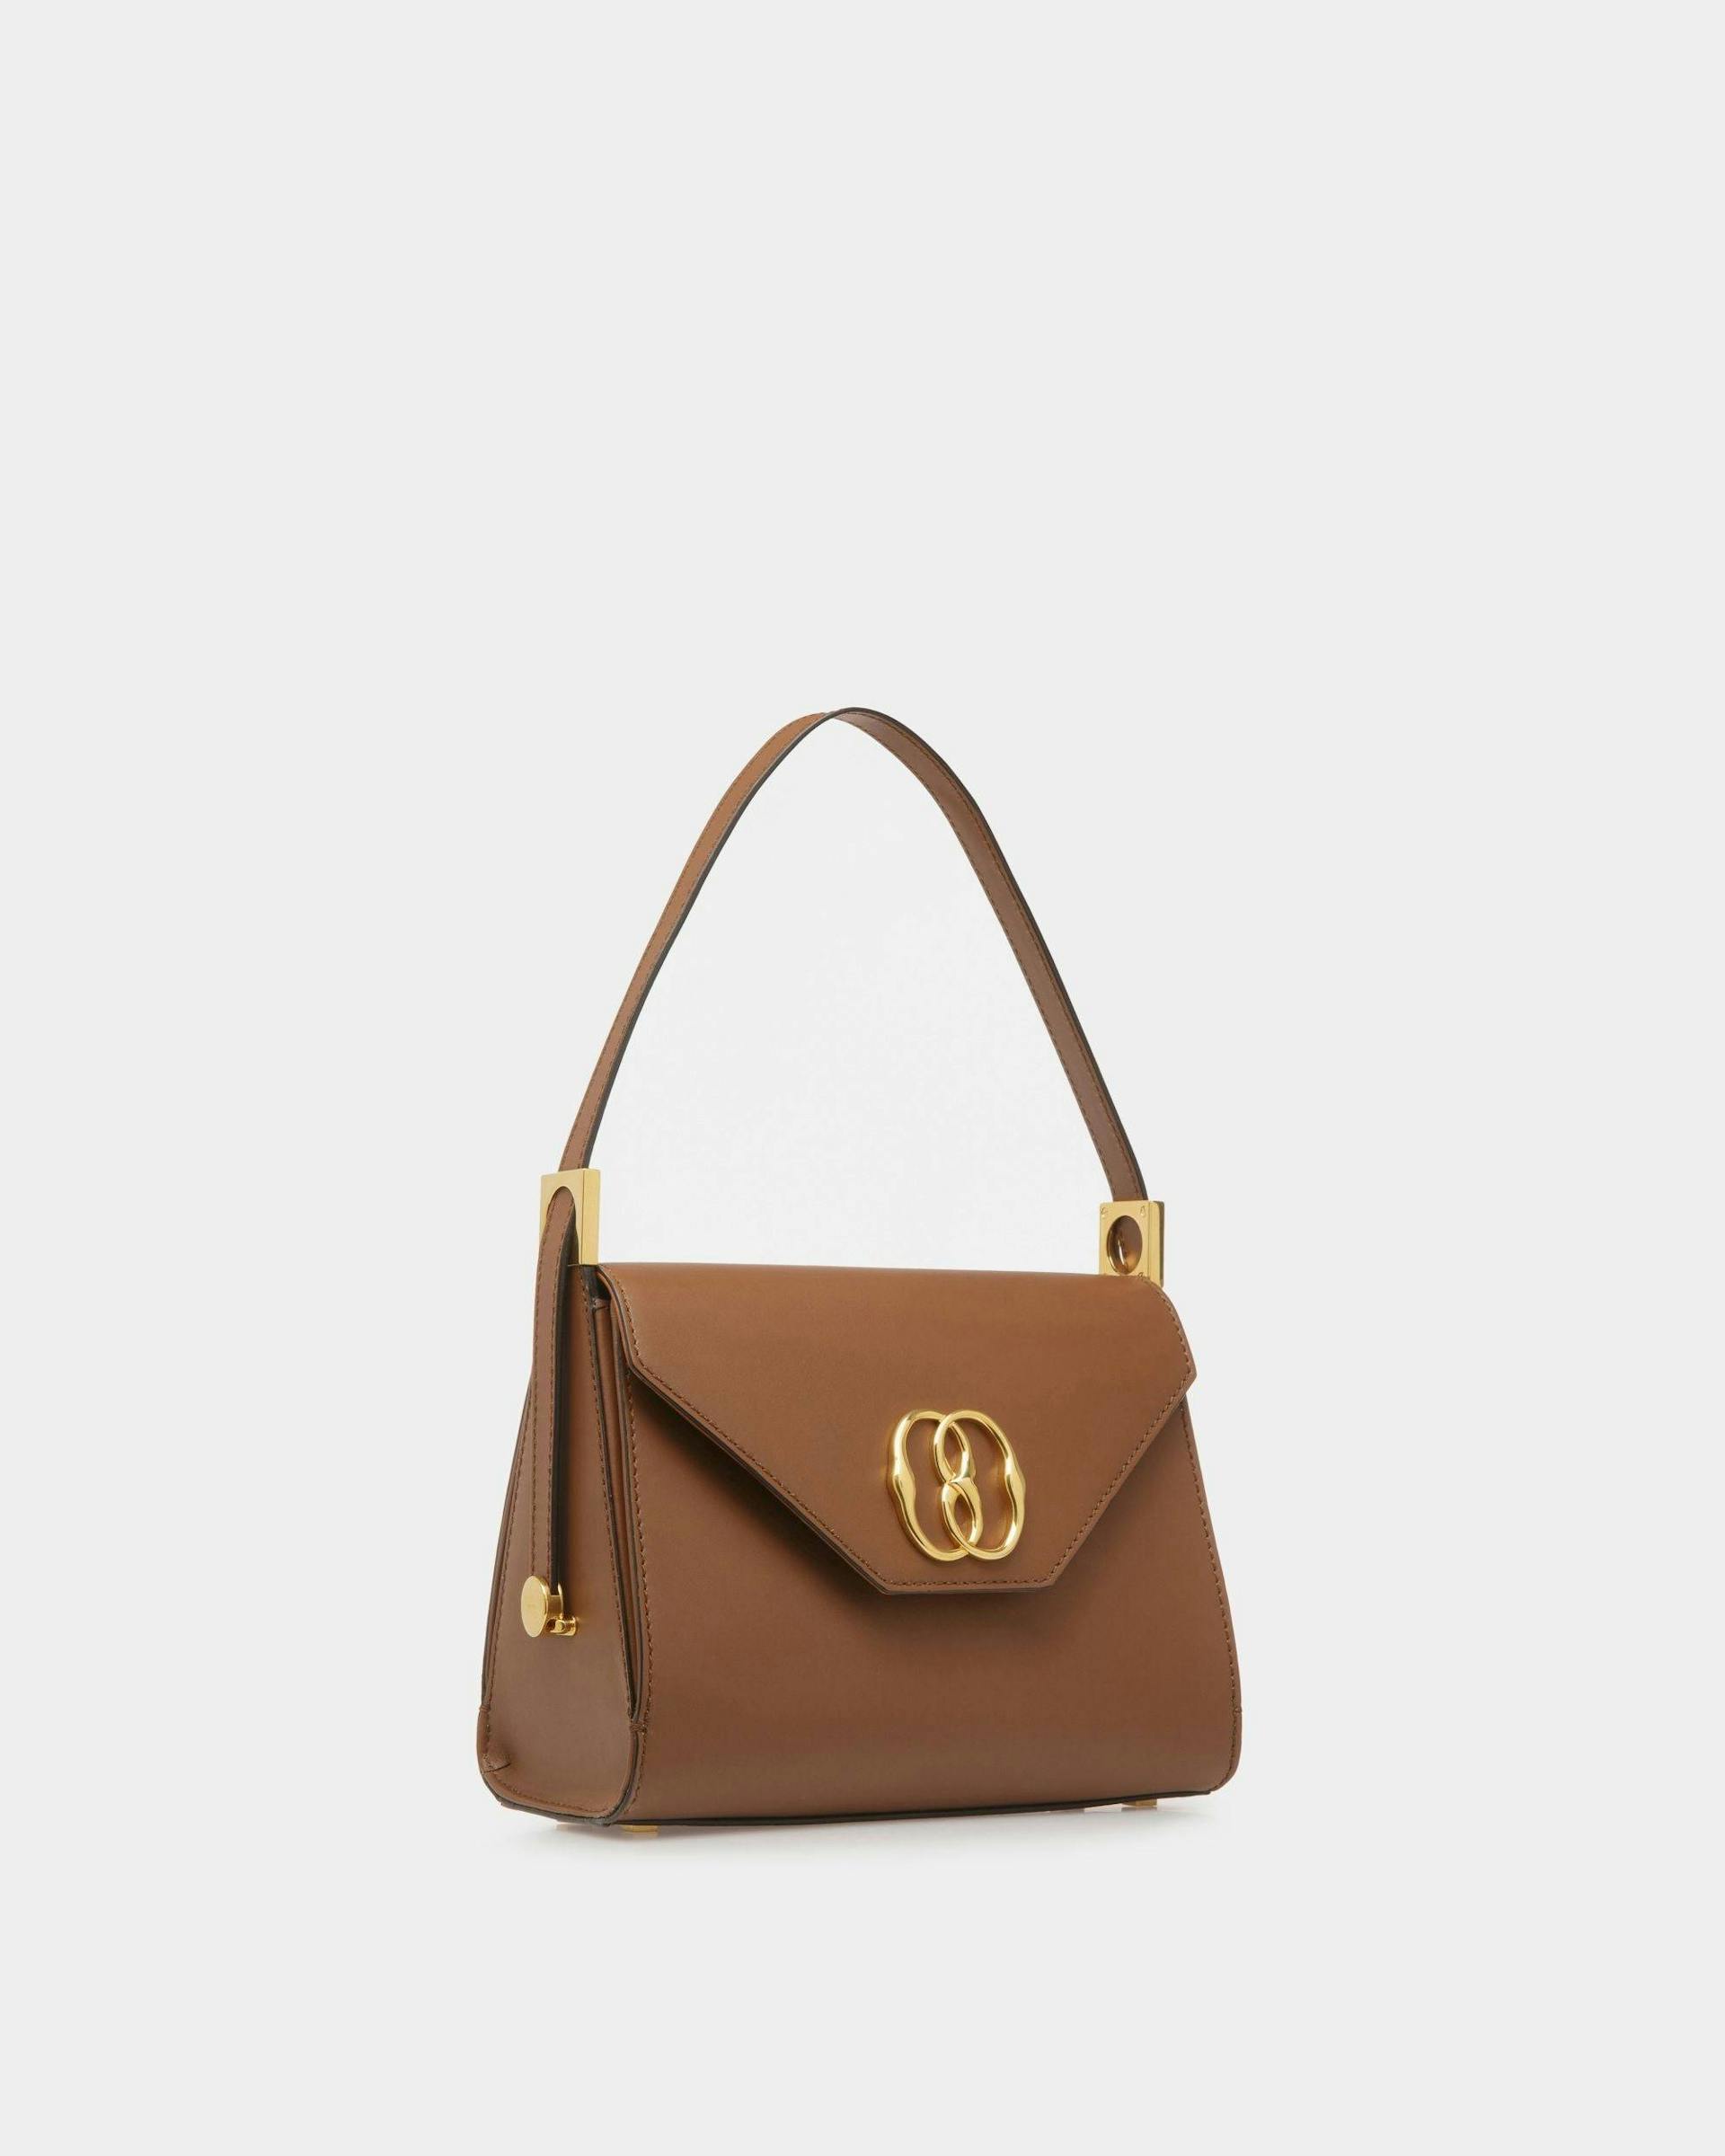 Women's Emblem Top Handle Bag In Brown Leather | Bally | Still Life 3/4 Front